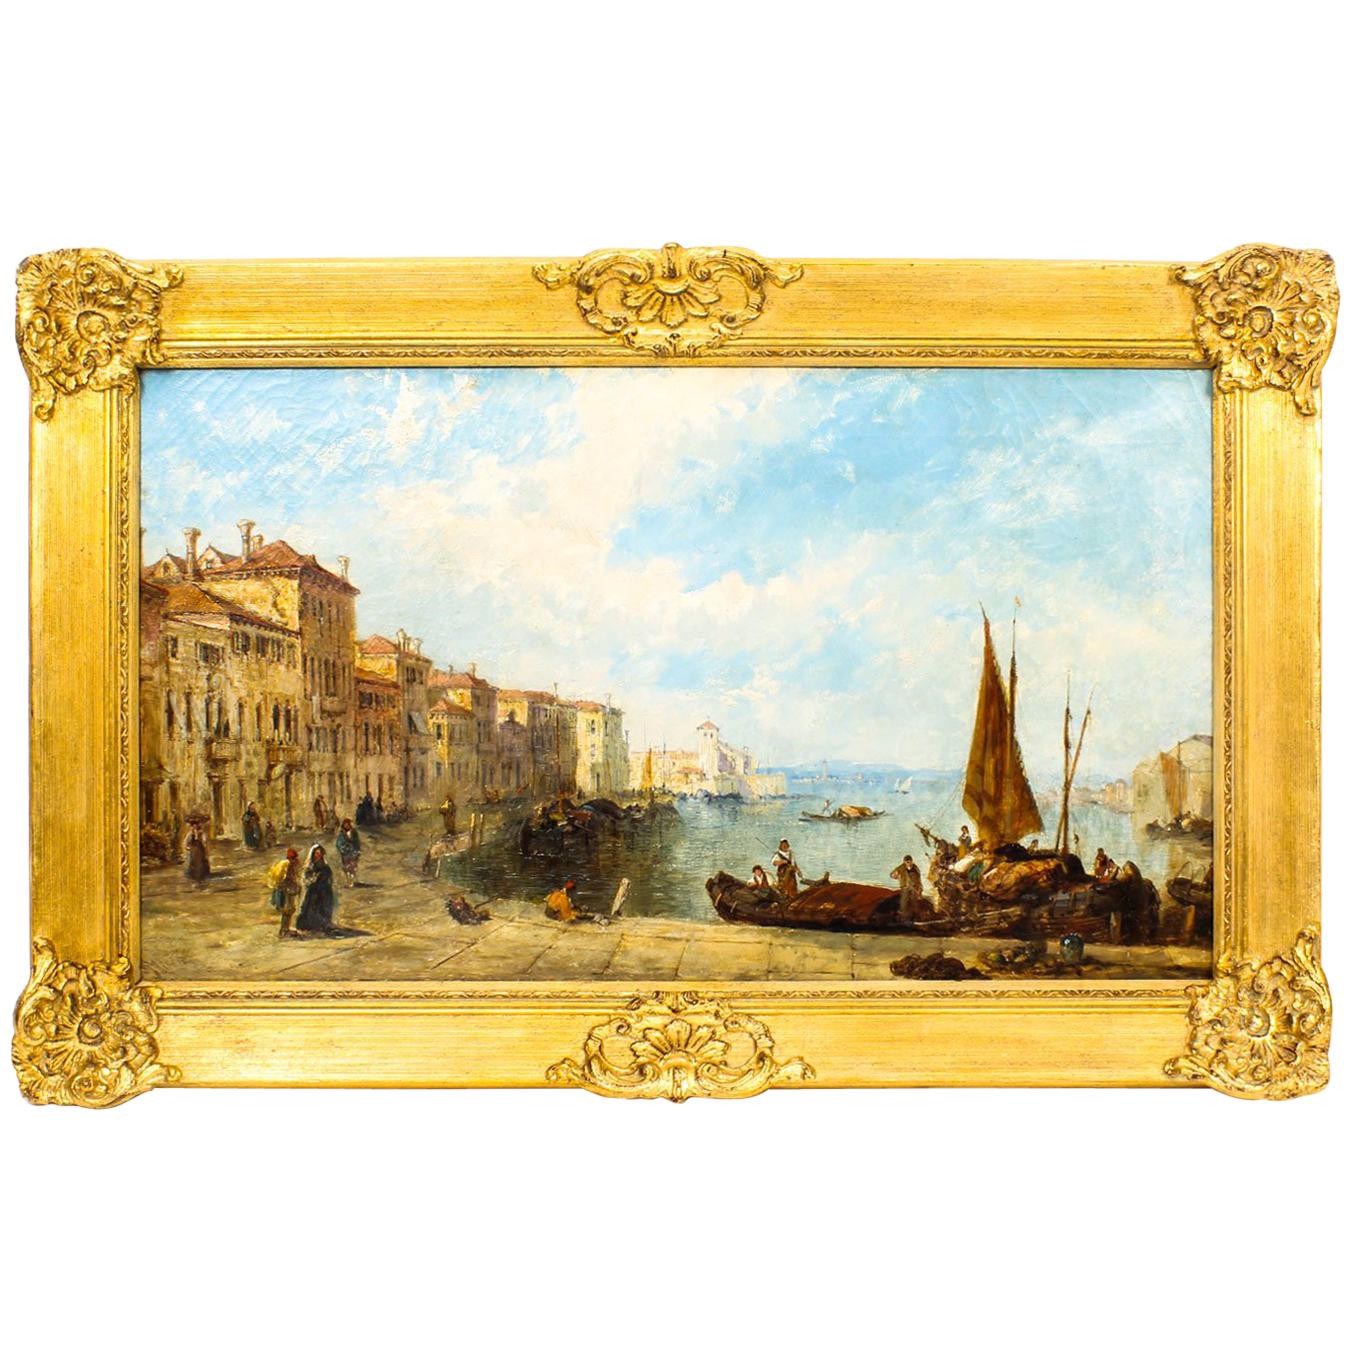 Antique Oil Painting Venetian Scene of The Grand Canal J.Vivian, 19th Century